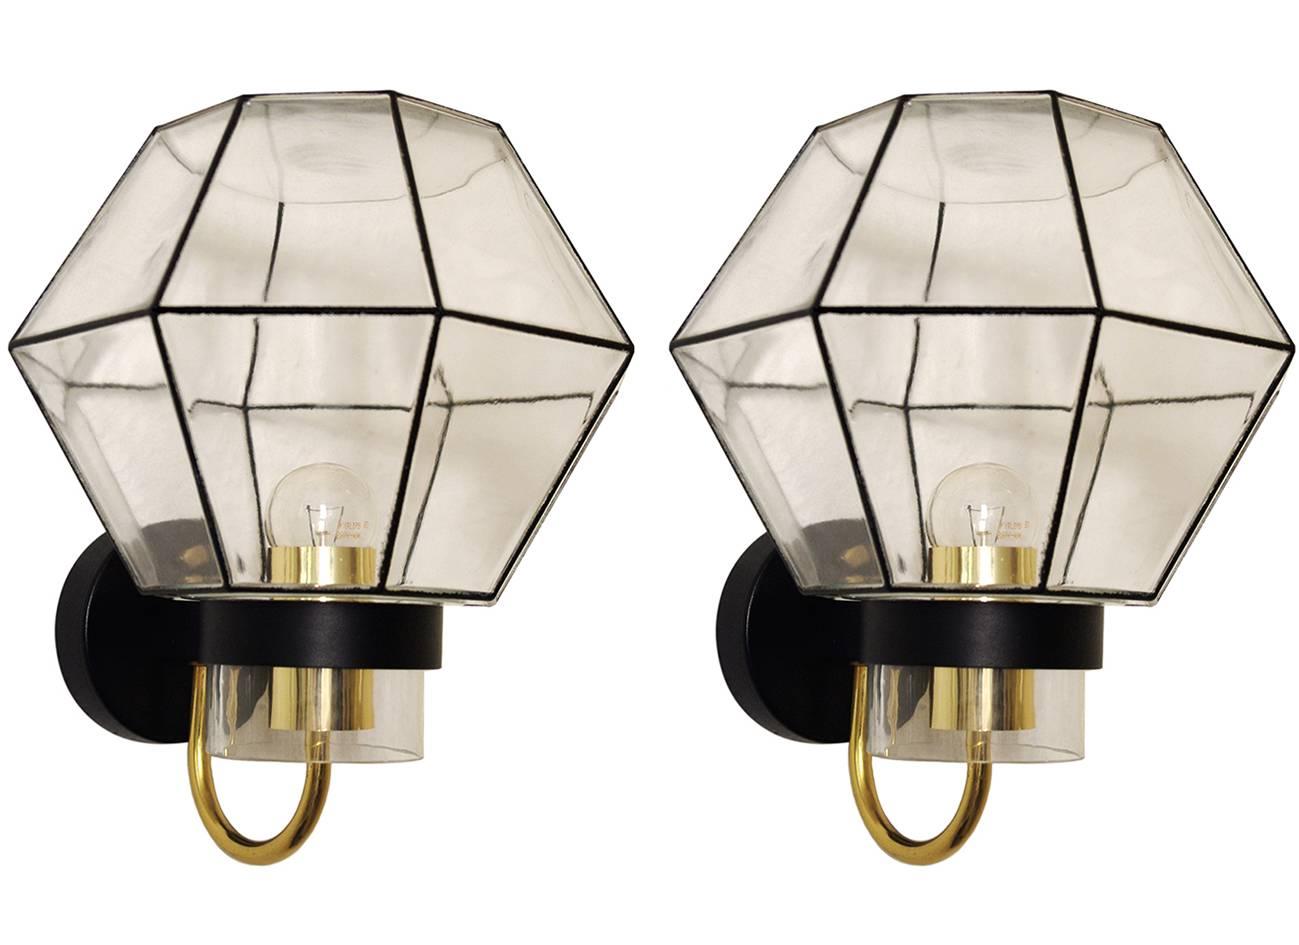 Pair of large blown glass, brass and iron wall lights.
Germany, 1960s.
Lamp sockets: 1x E27 (US E26)
